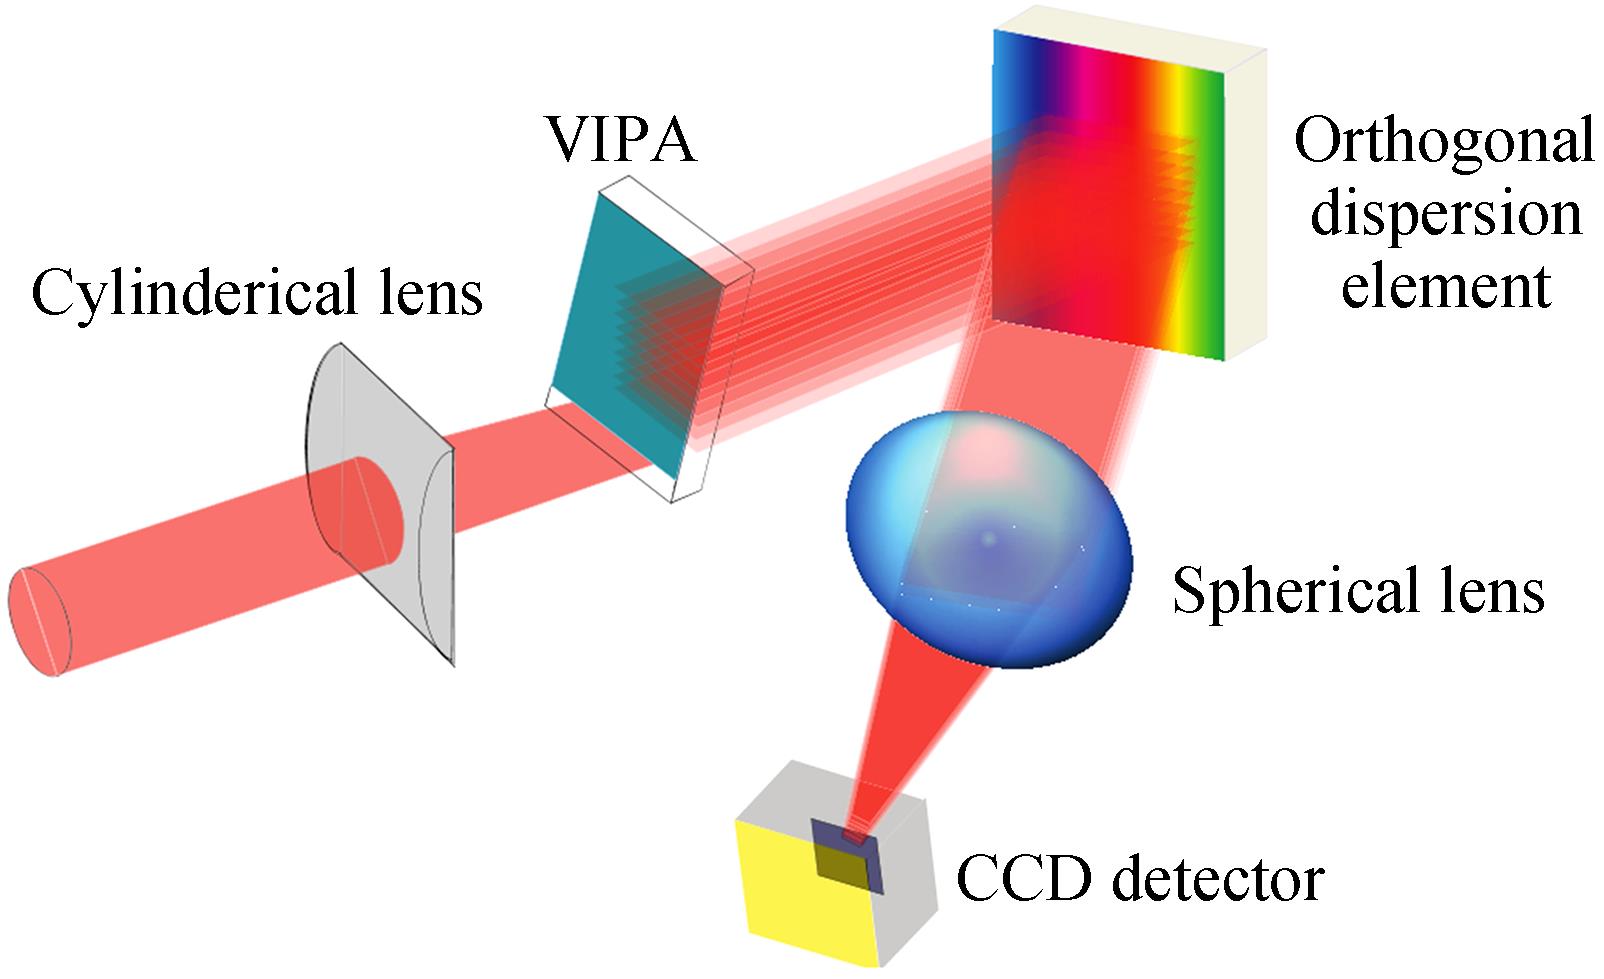 The schematic of the VIPA spectroscopic instrument